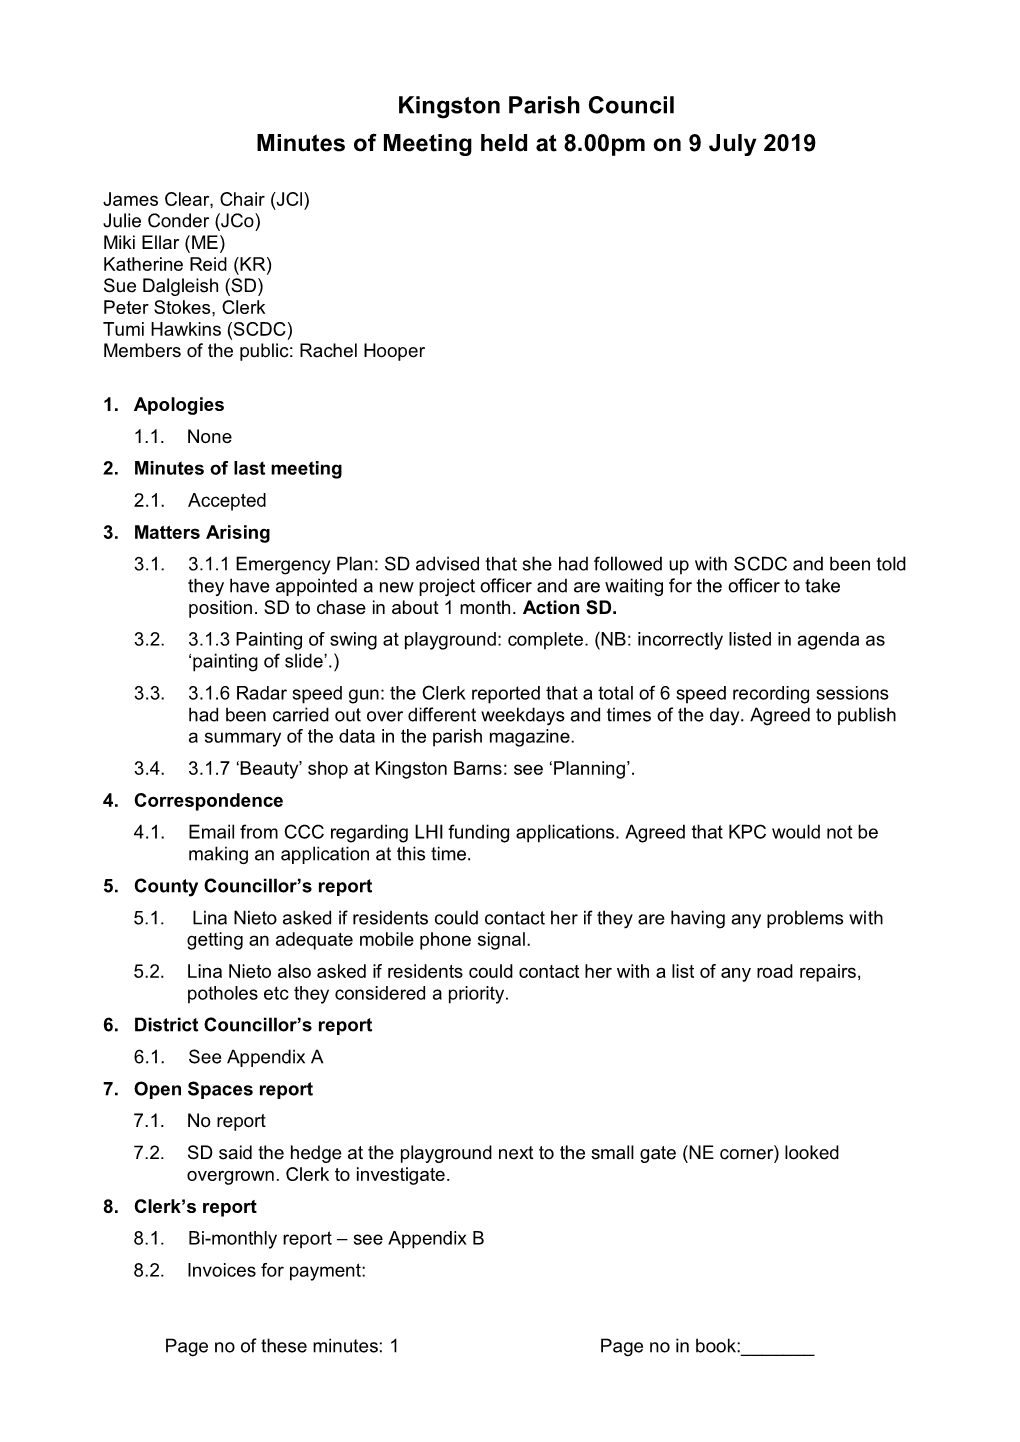 Kingston Parish Council Minutes of Meeting Held at 8.00Pm on 9 July 2019